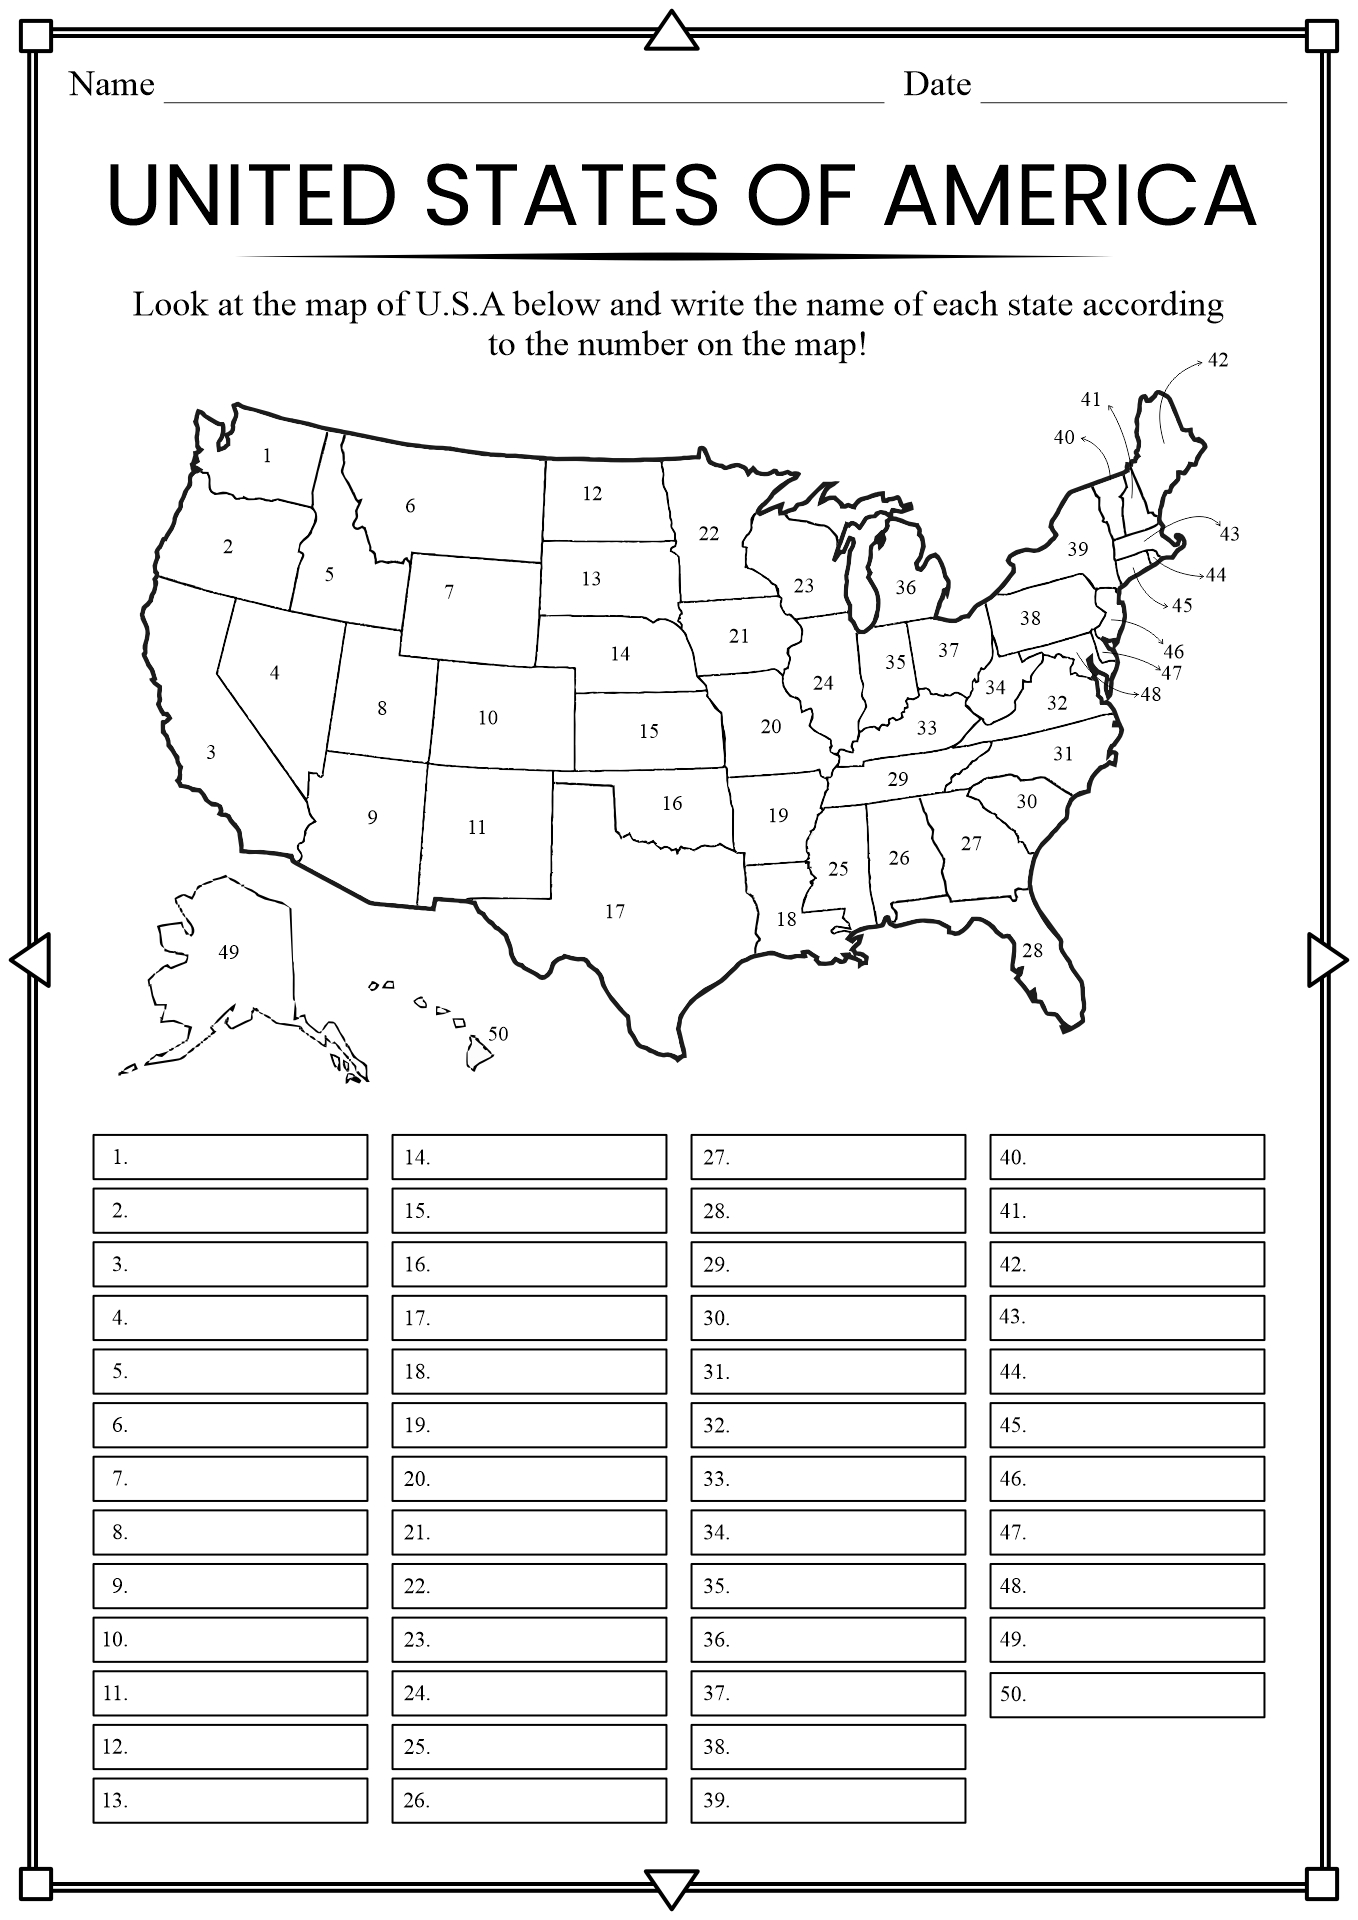 13 Best Images Of United States Worksheets 5th Grade 50 United States